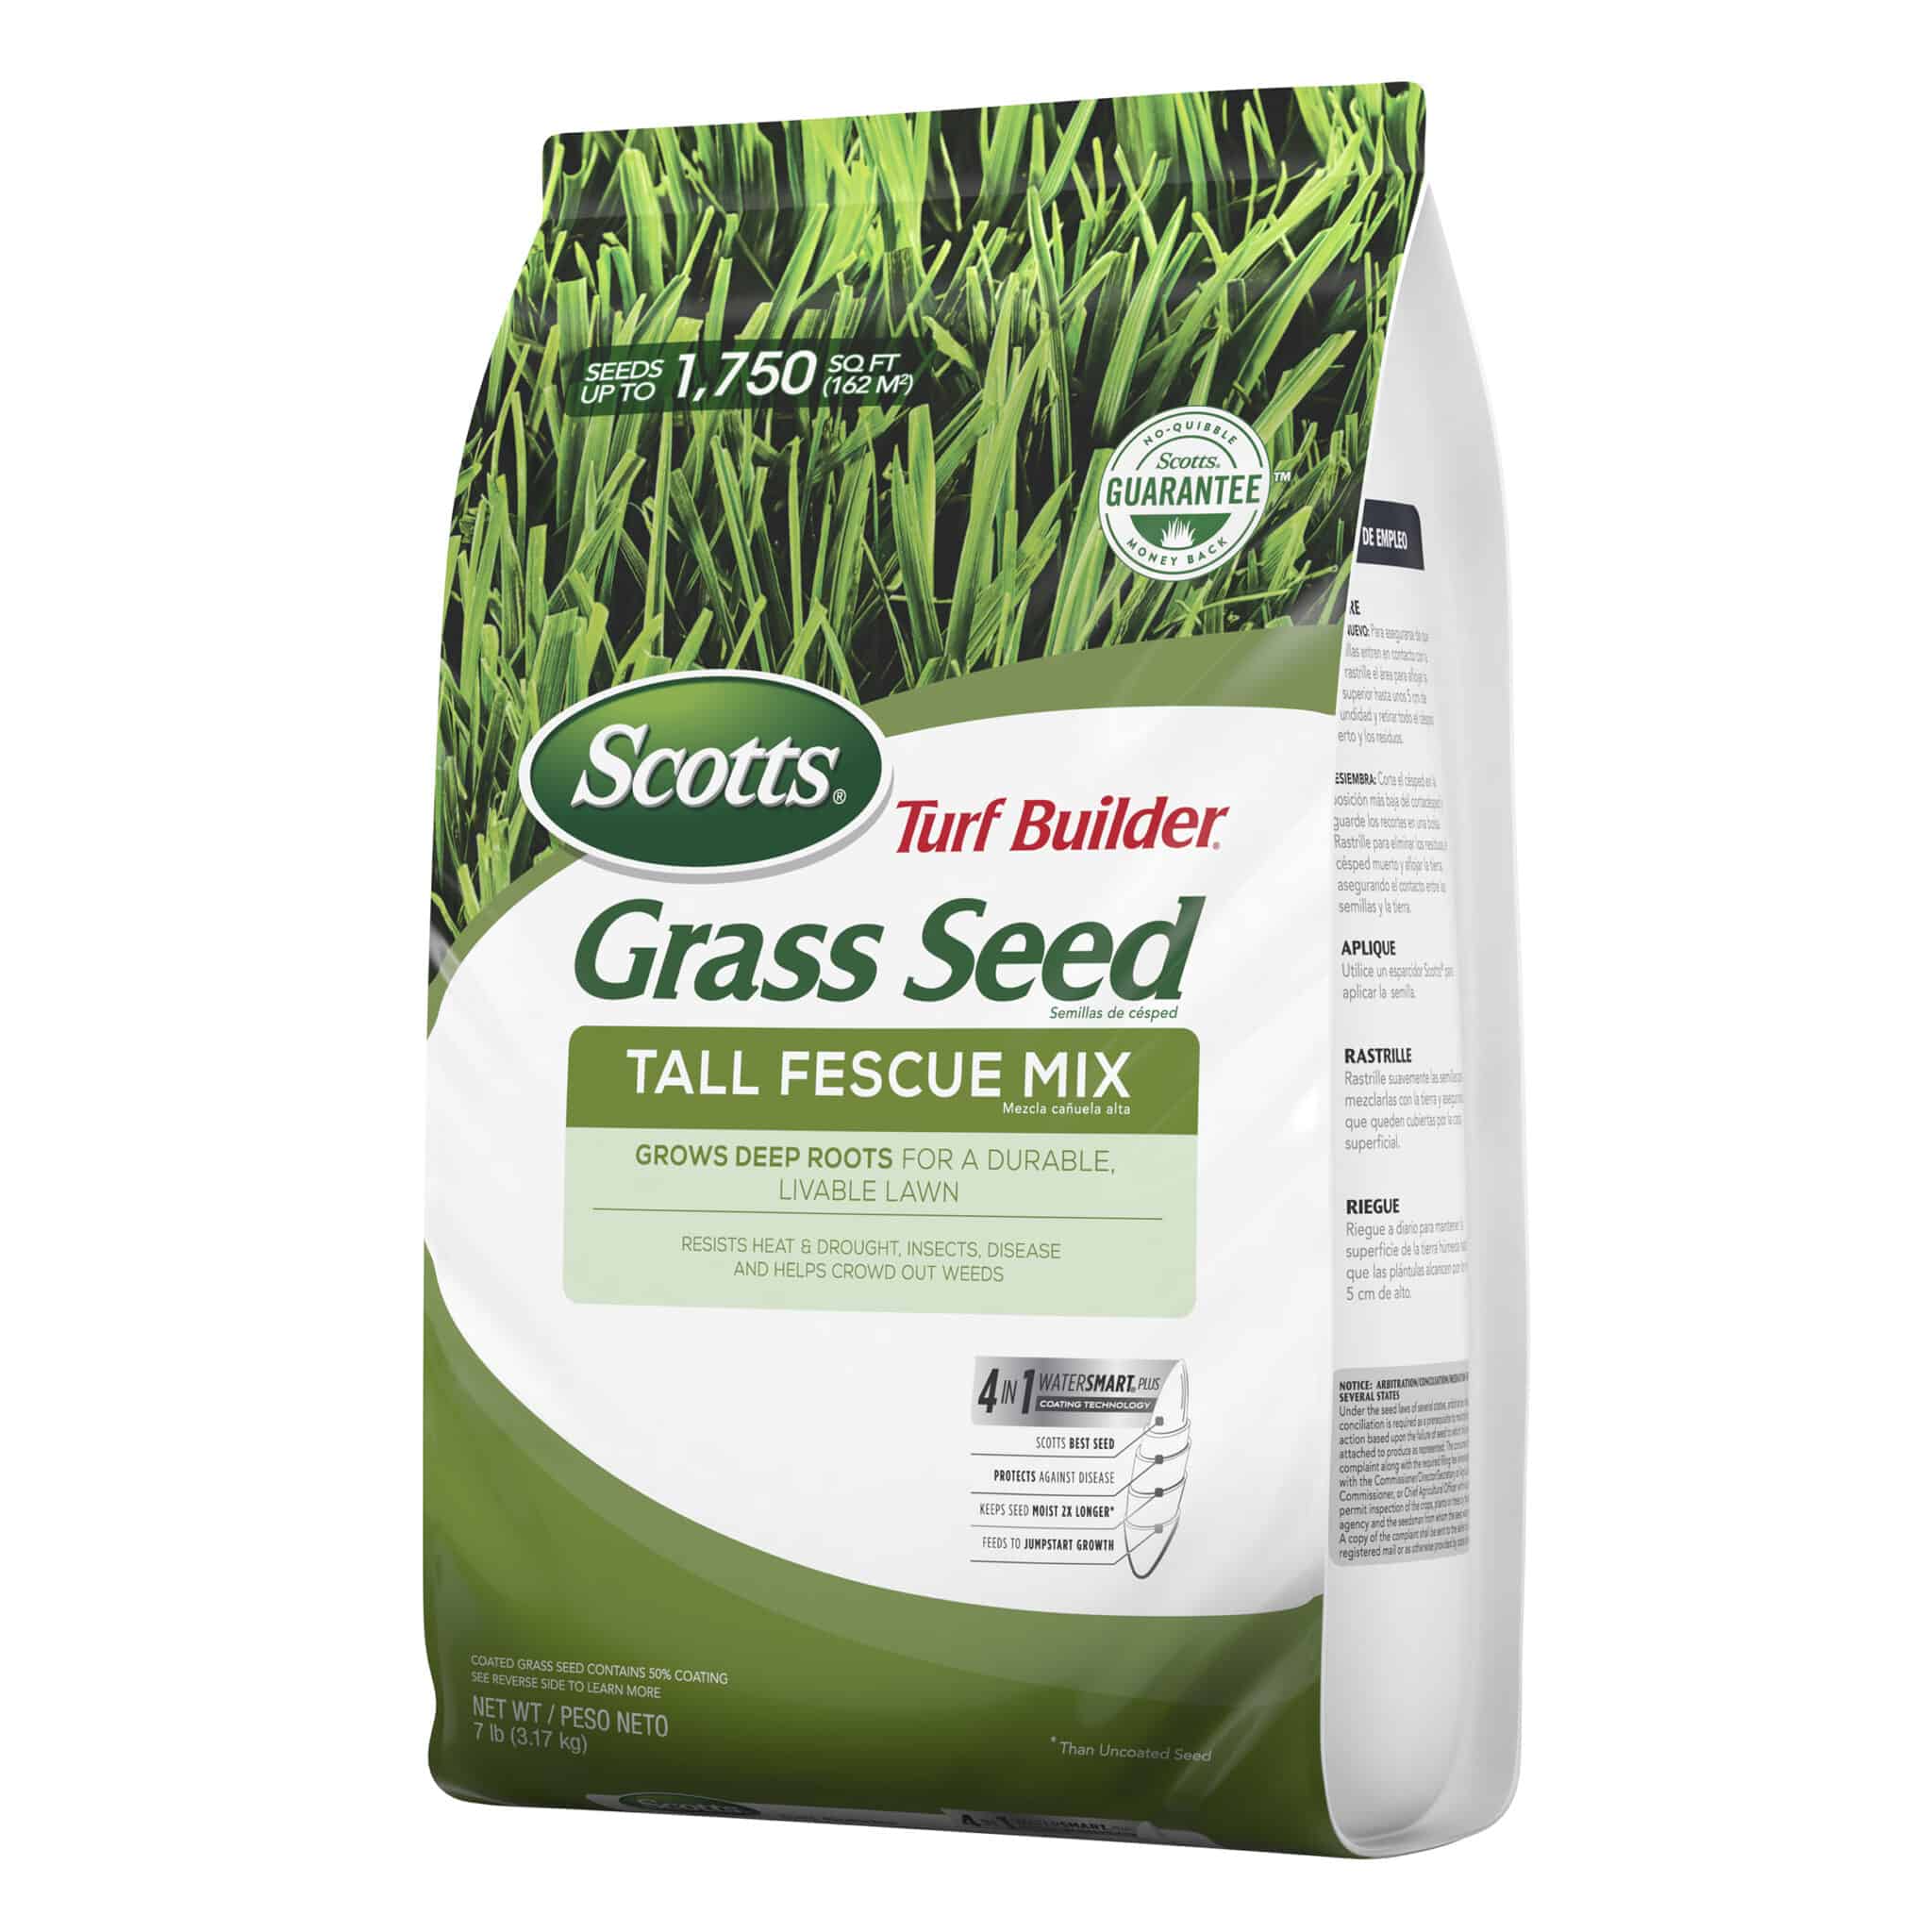 Top 10 Best Grass Seed For Overseeding In 2021 - Expert's Review Best Grass Seed For Oklahoma Shade